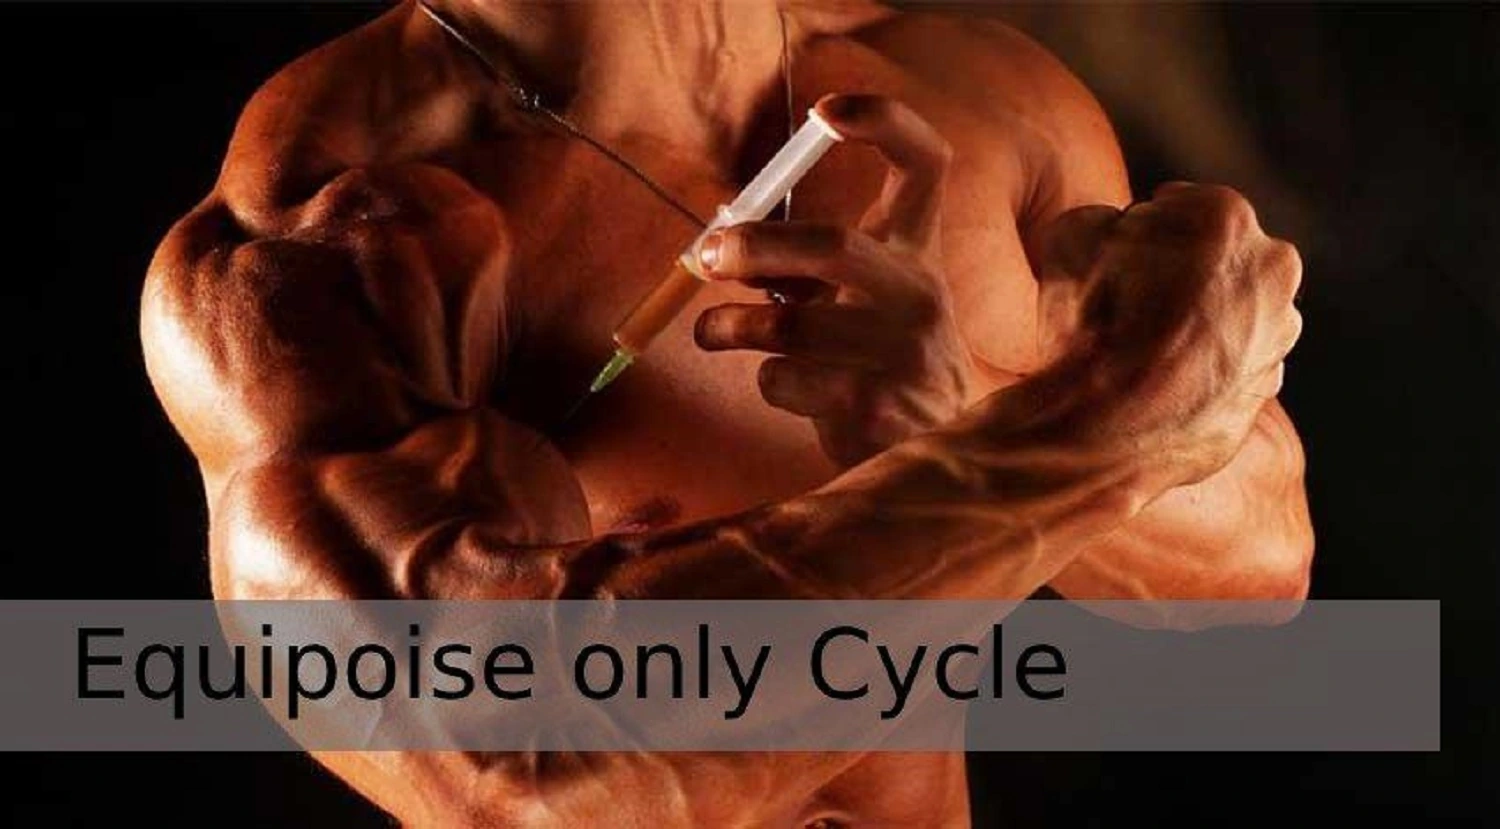 Equipoise only cycle